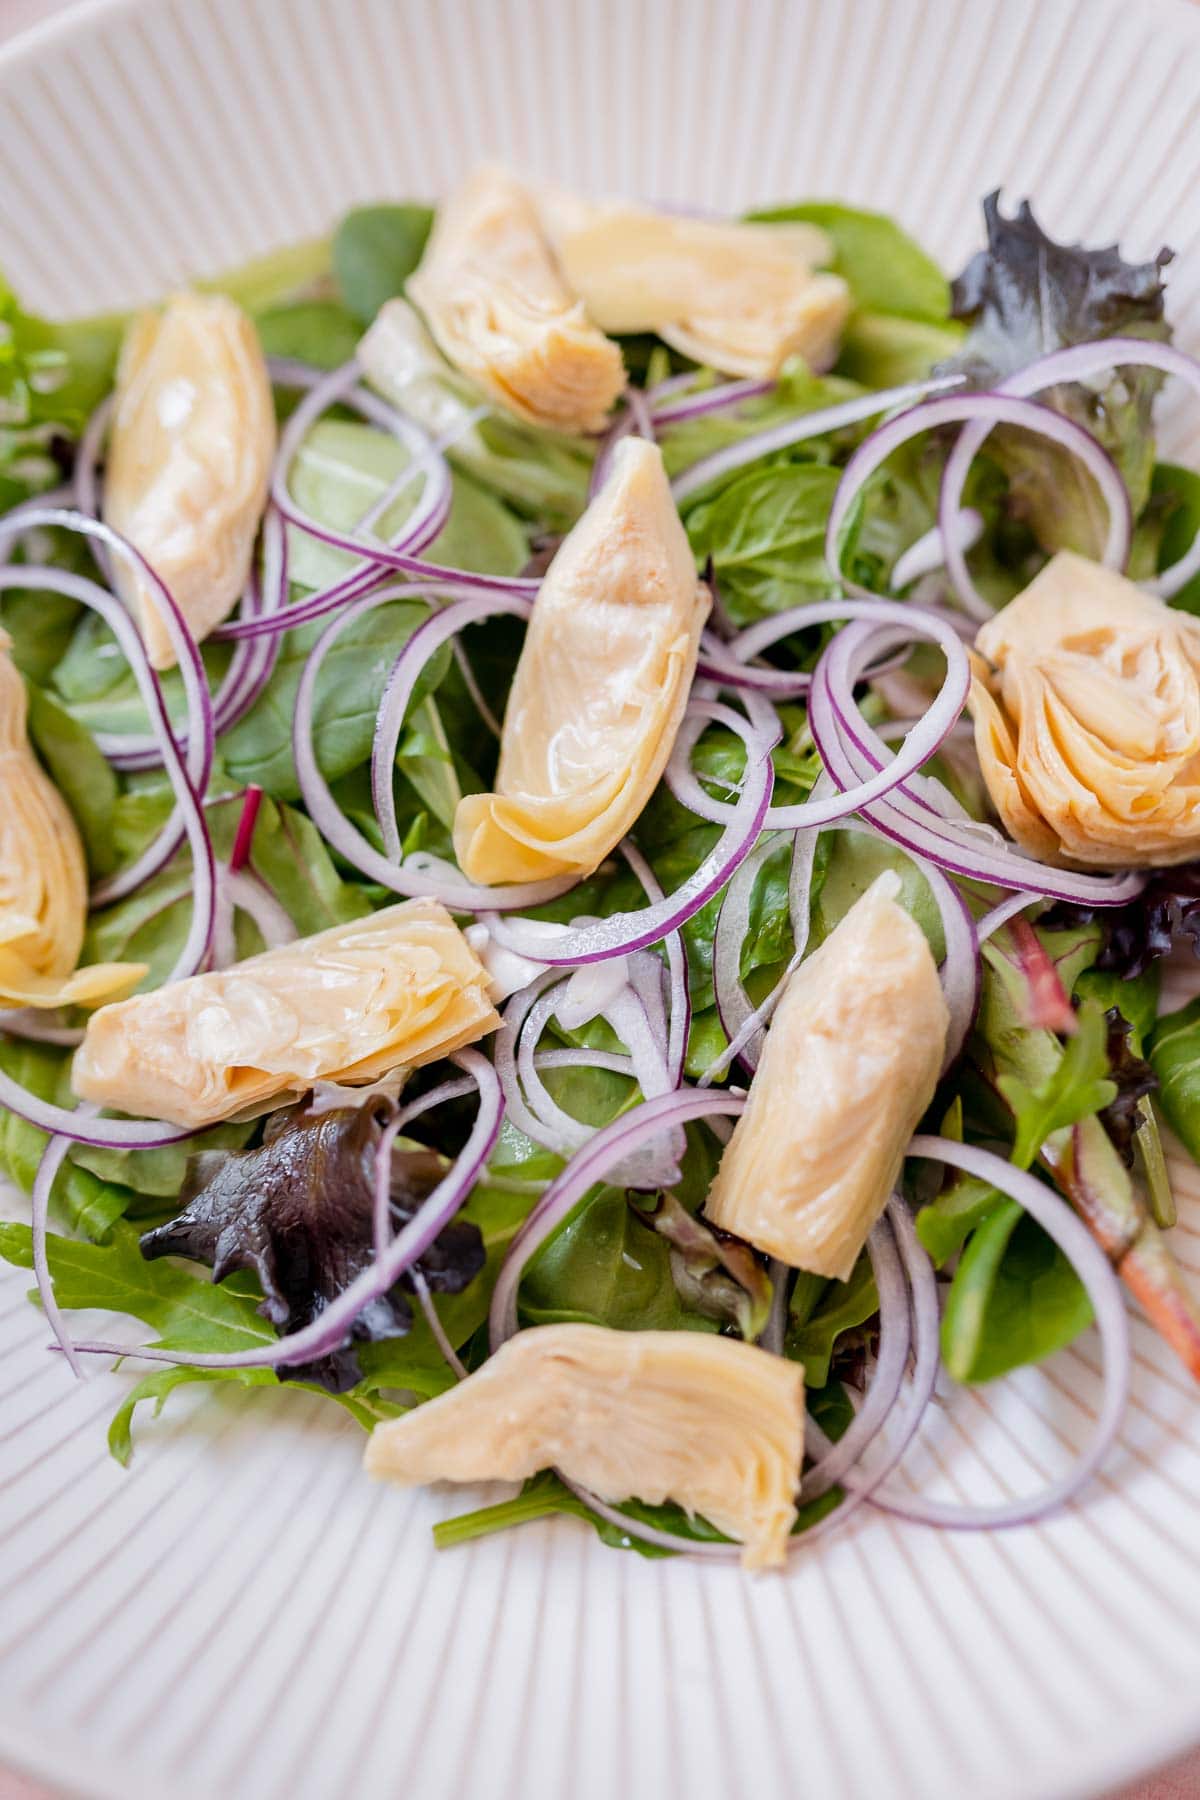 A large white bowl of salad greens, onion slices, and artichoke hearts.